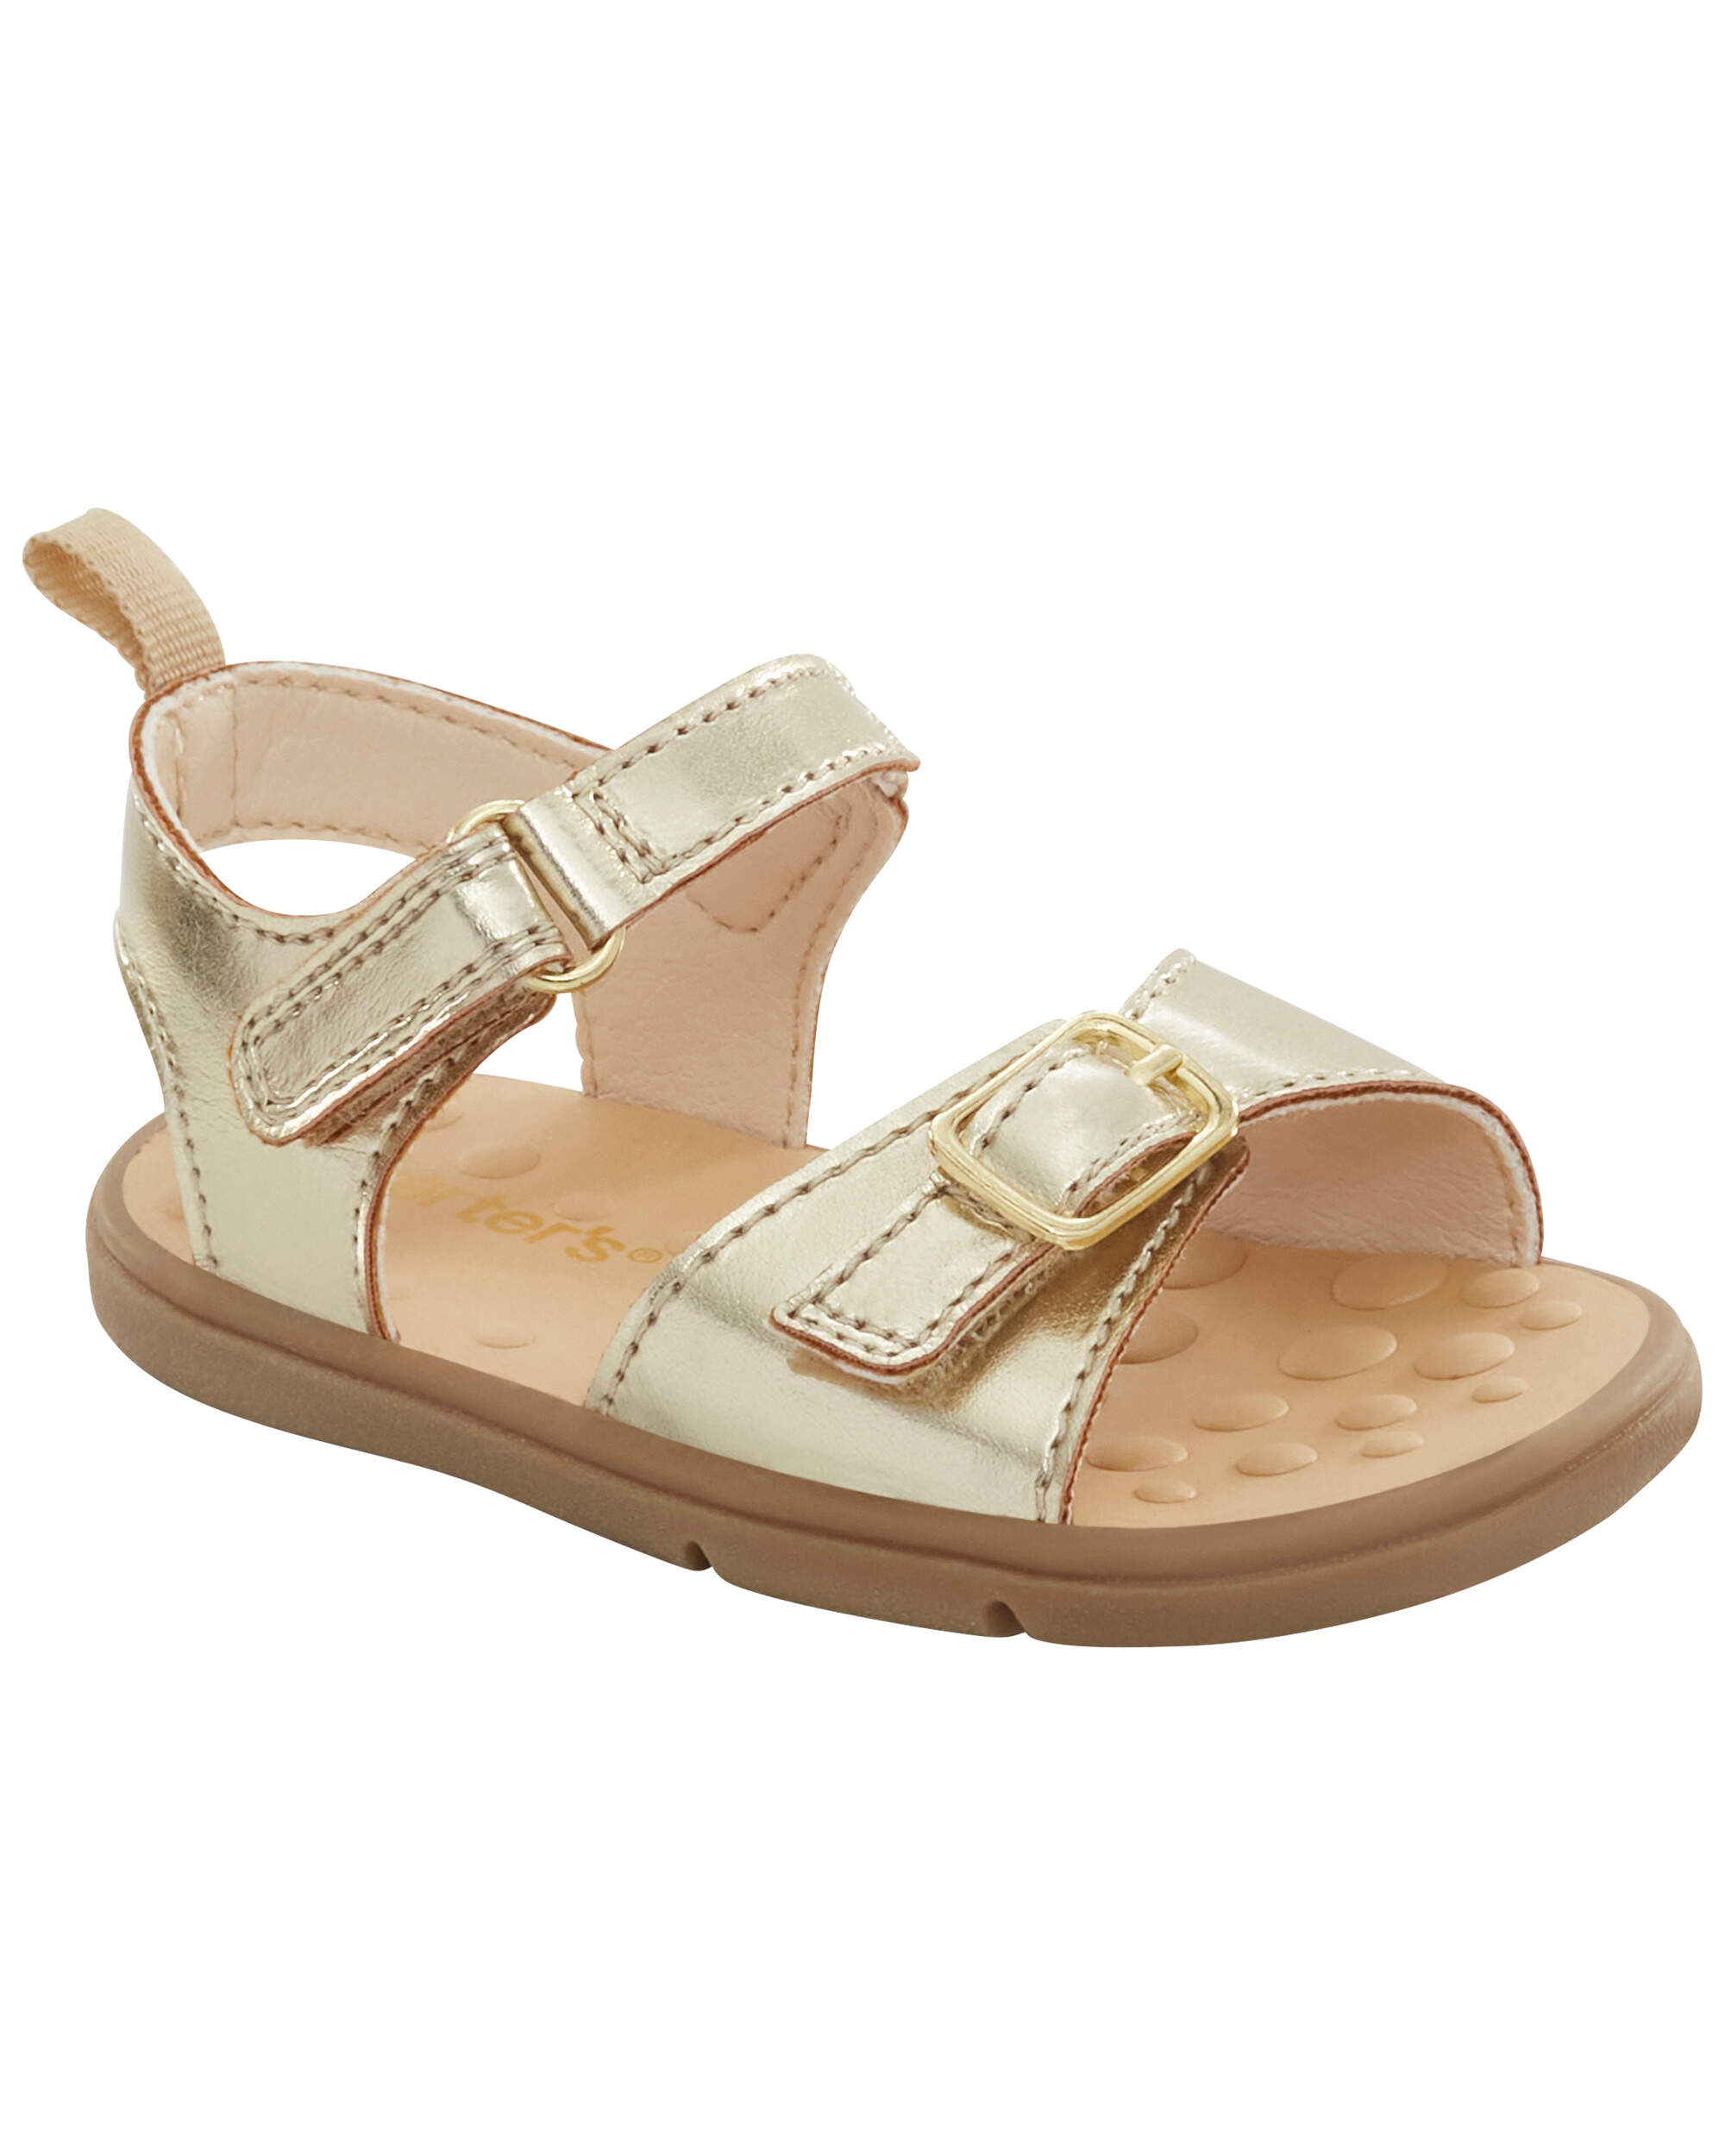 Toddler Girls Twist Band Ankle Strap Sandals - Gold